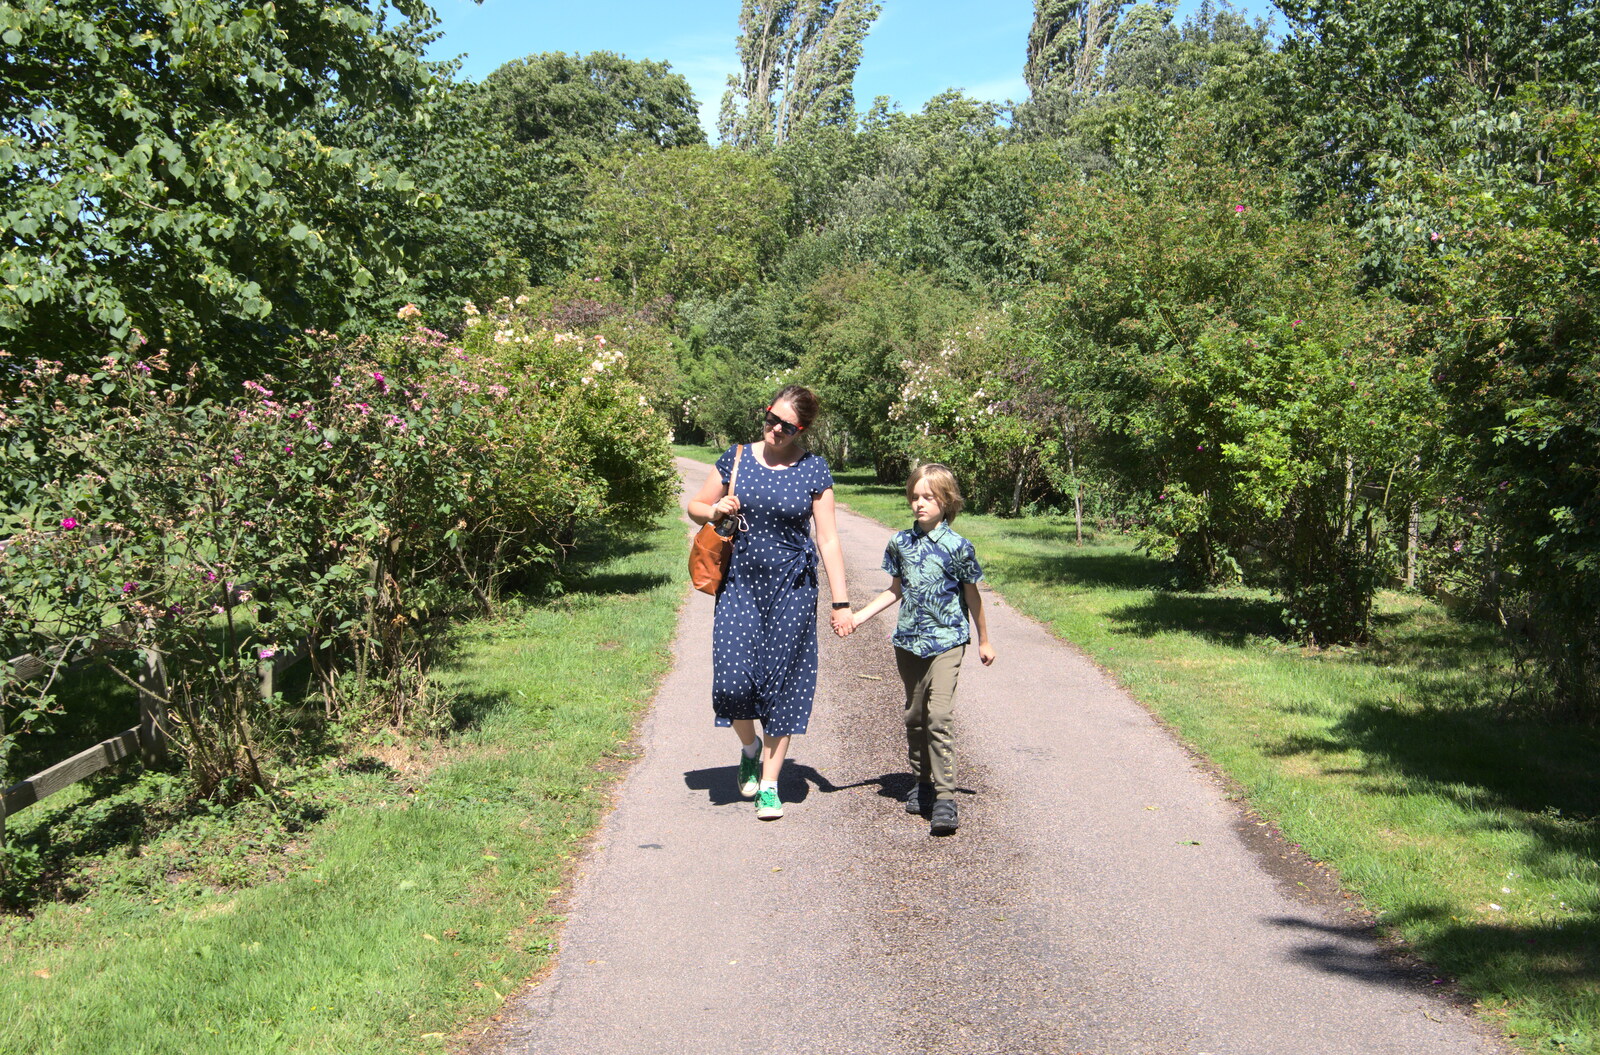 Isobel and Harry on the path past the Abbey from A Walk Around Abbey Bridges, Eye, Suffolk - 5th July 2020